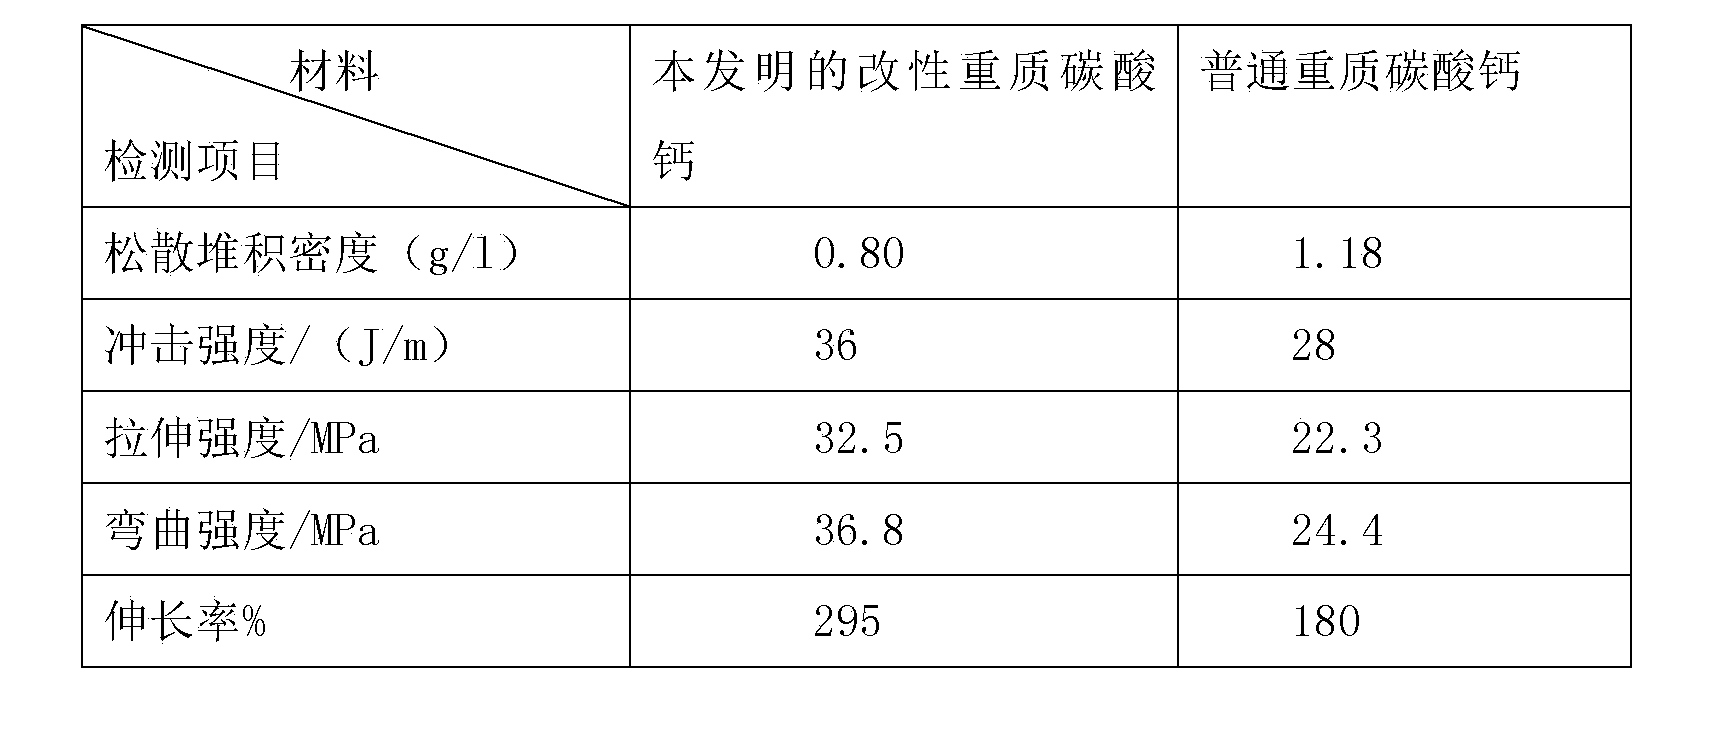 Anti-aging modified calcium carbonate for paint-latex paint and preparation method thereof